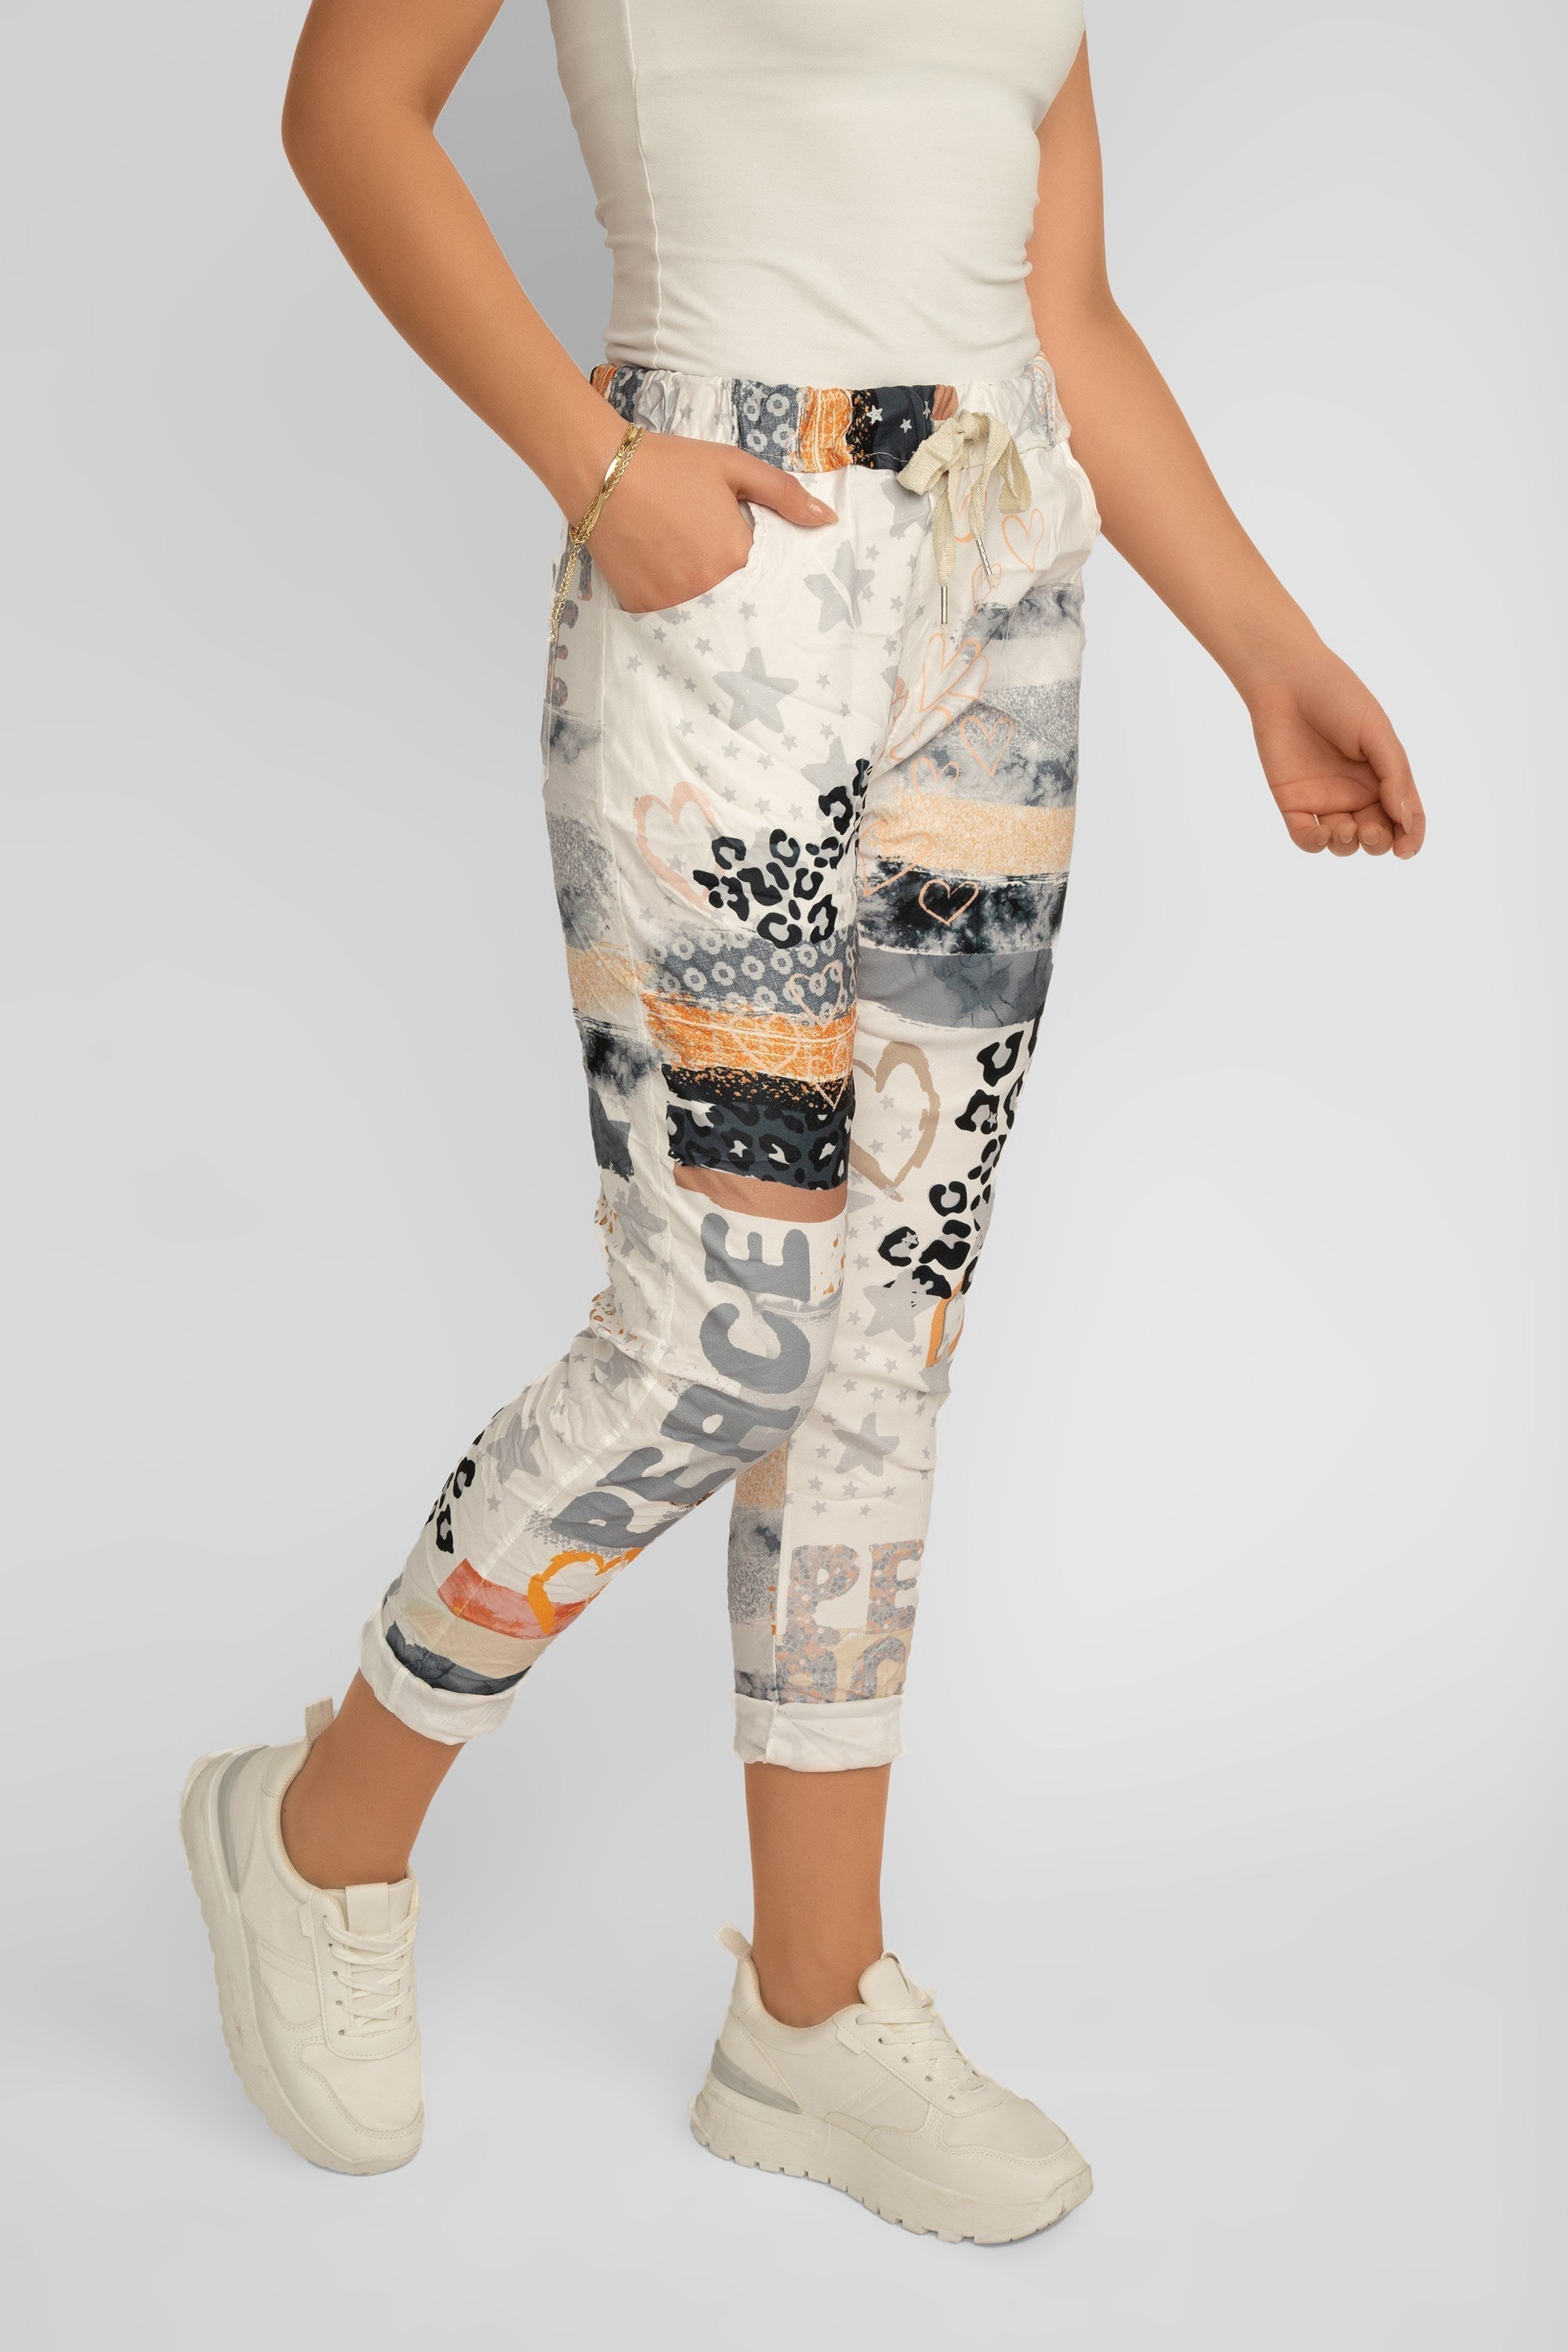 Bella Amore Women's Cropped Multi Print Pull-On Pants in a grey and multicoloured patchwork print